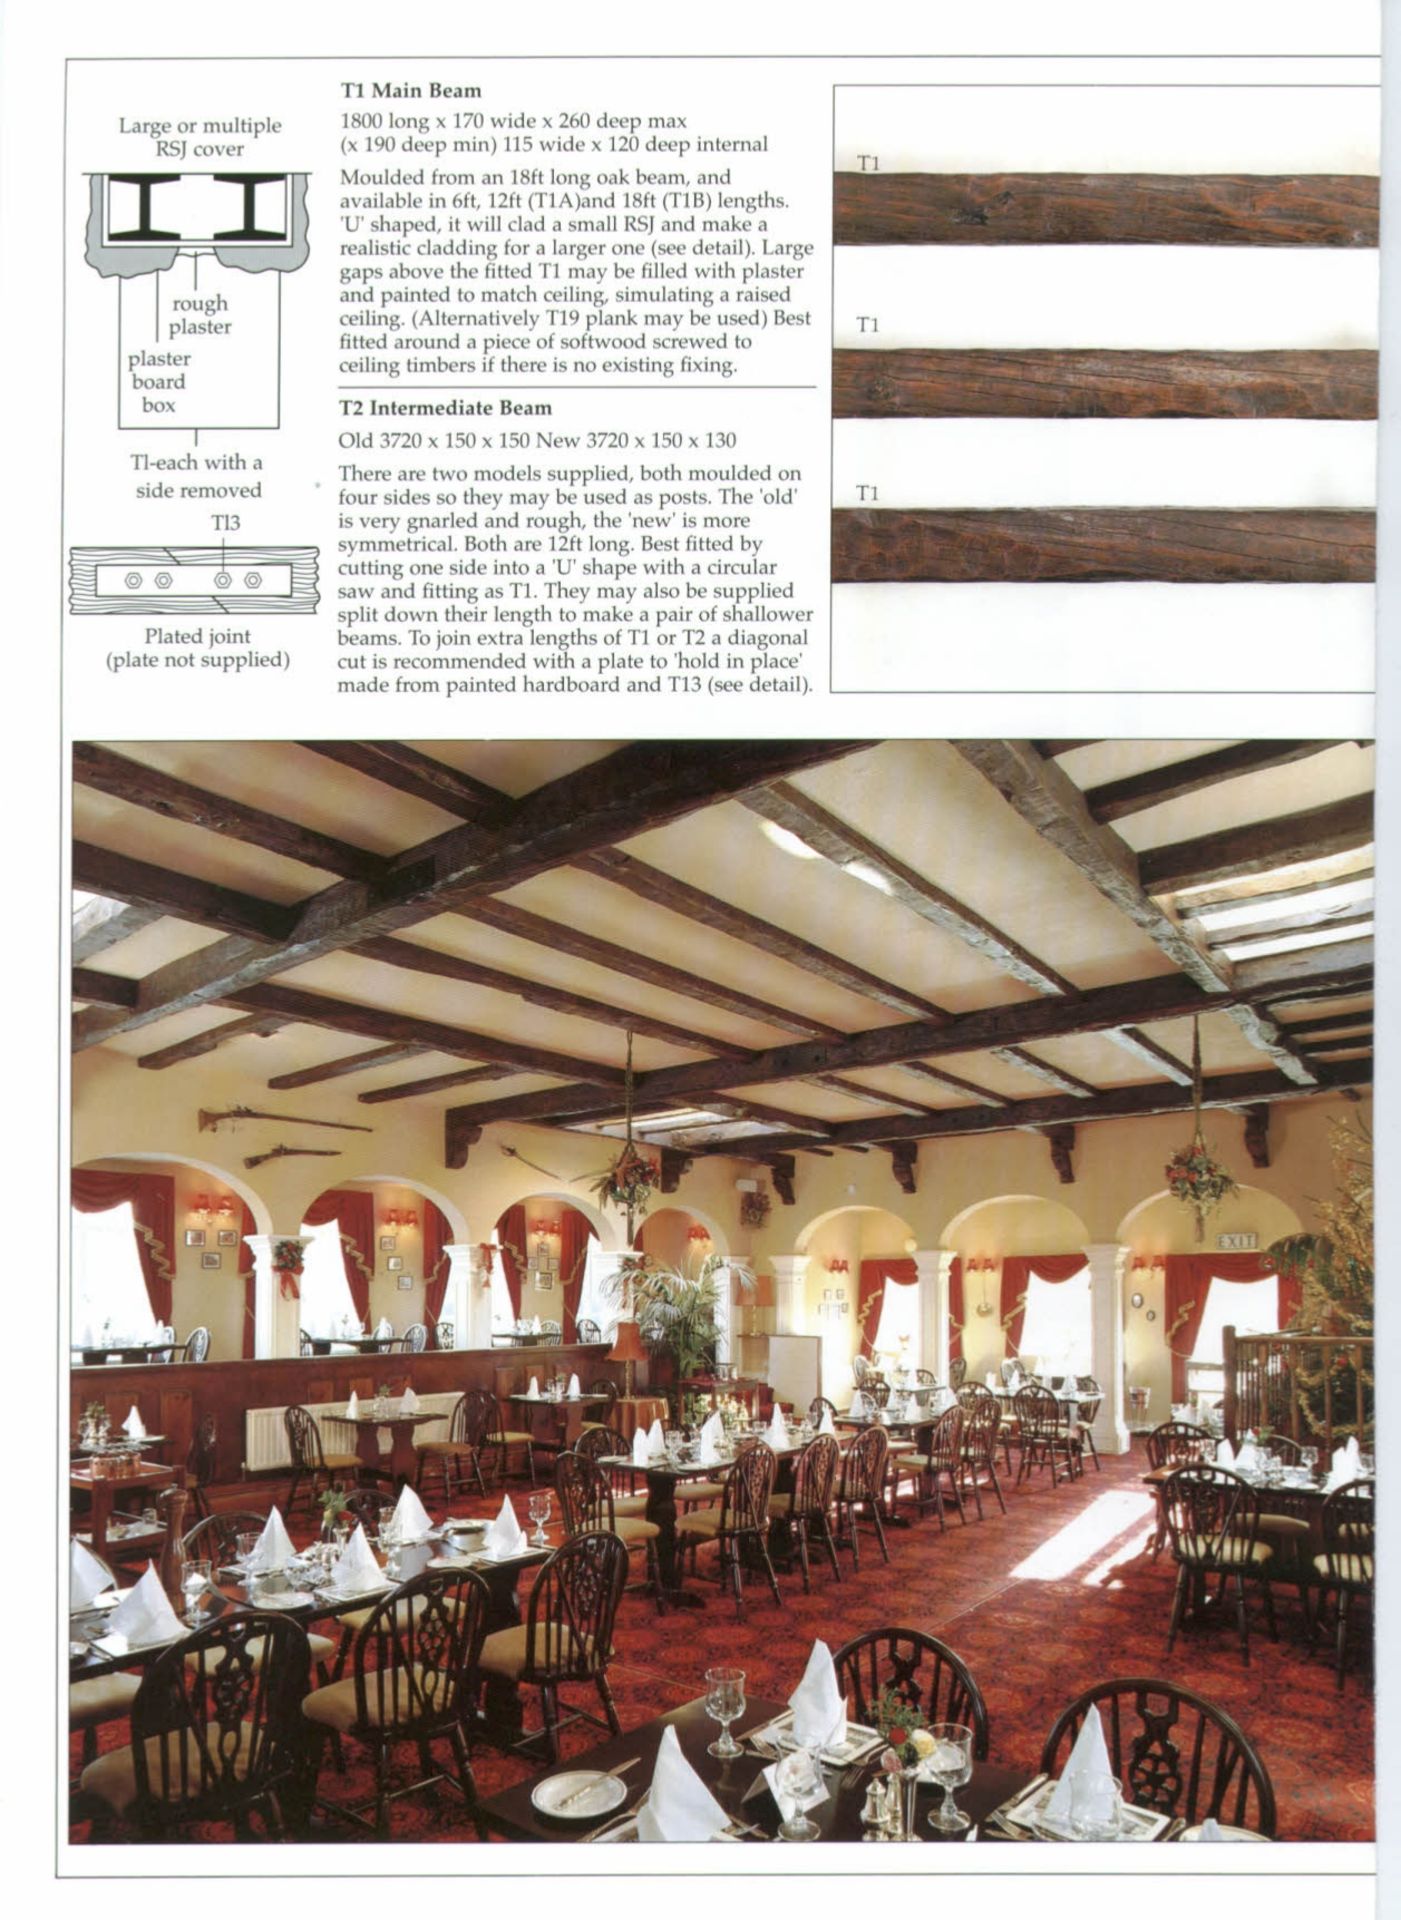 Rough-Hewn & adzed oak timbers, accs, moulds & master moulds (if available) for ceilings & walls - Bild 5 aus 7